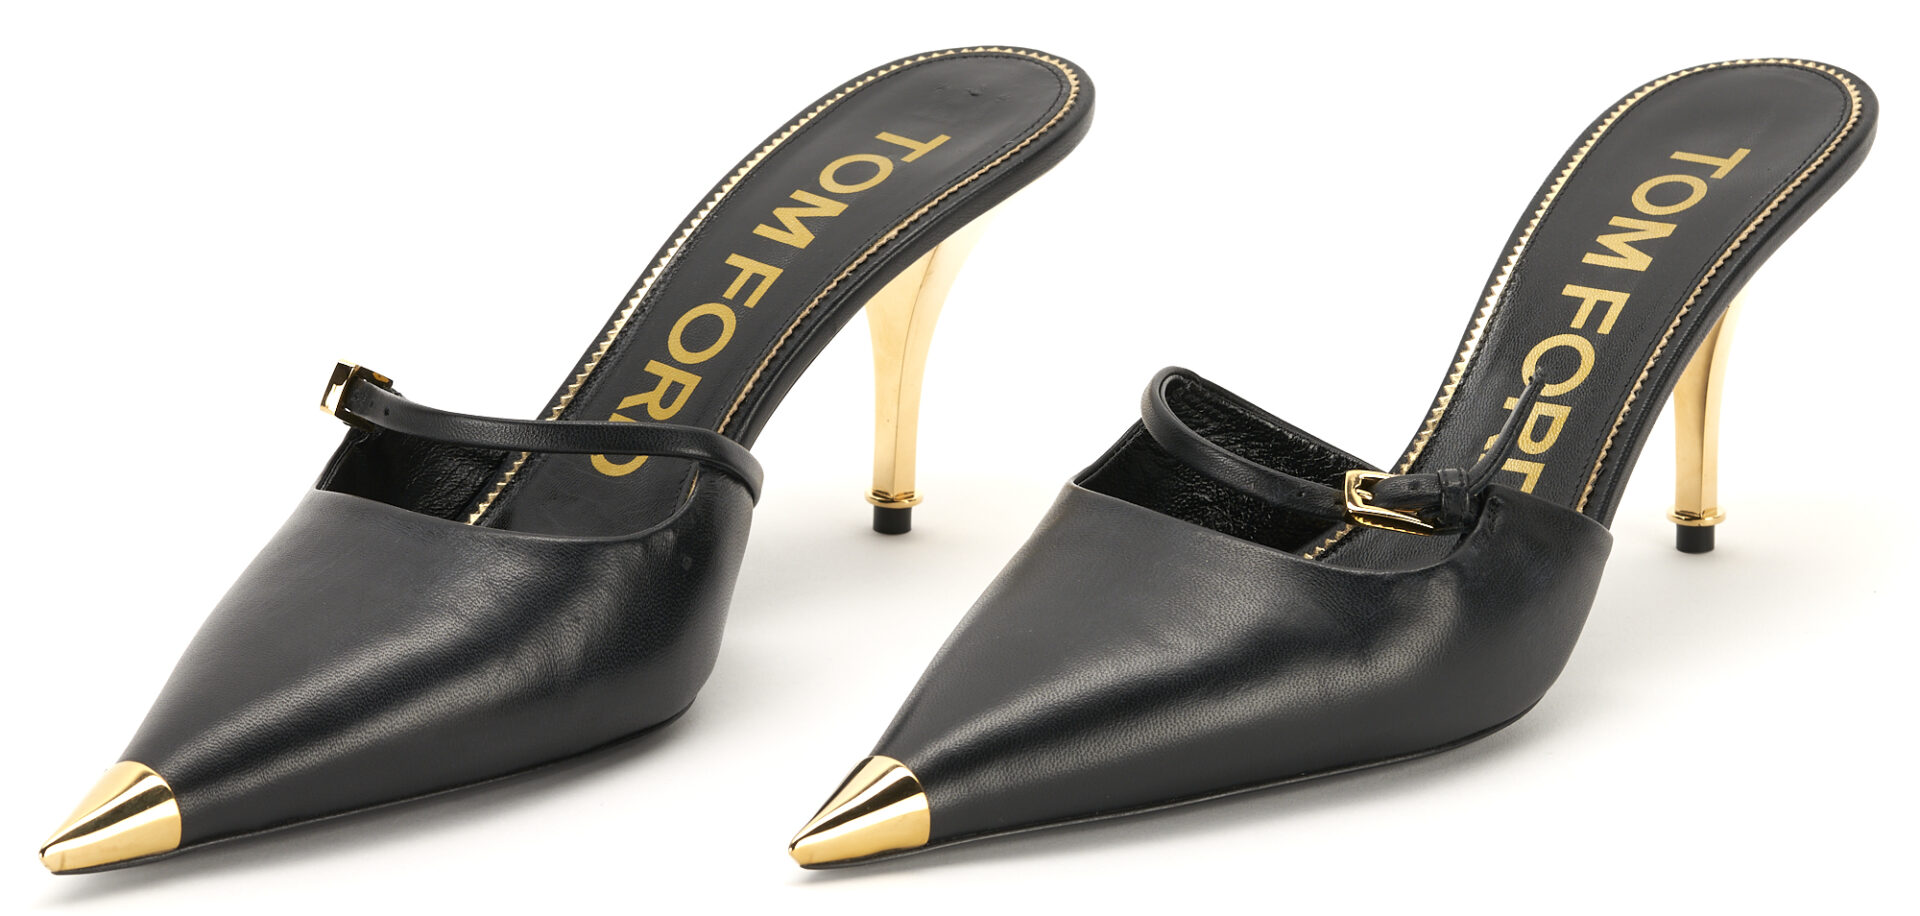 Lot 146: 3 prs. Tom Ford Pumps, incl. Mary Jane Mules